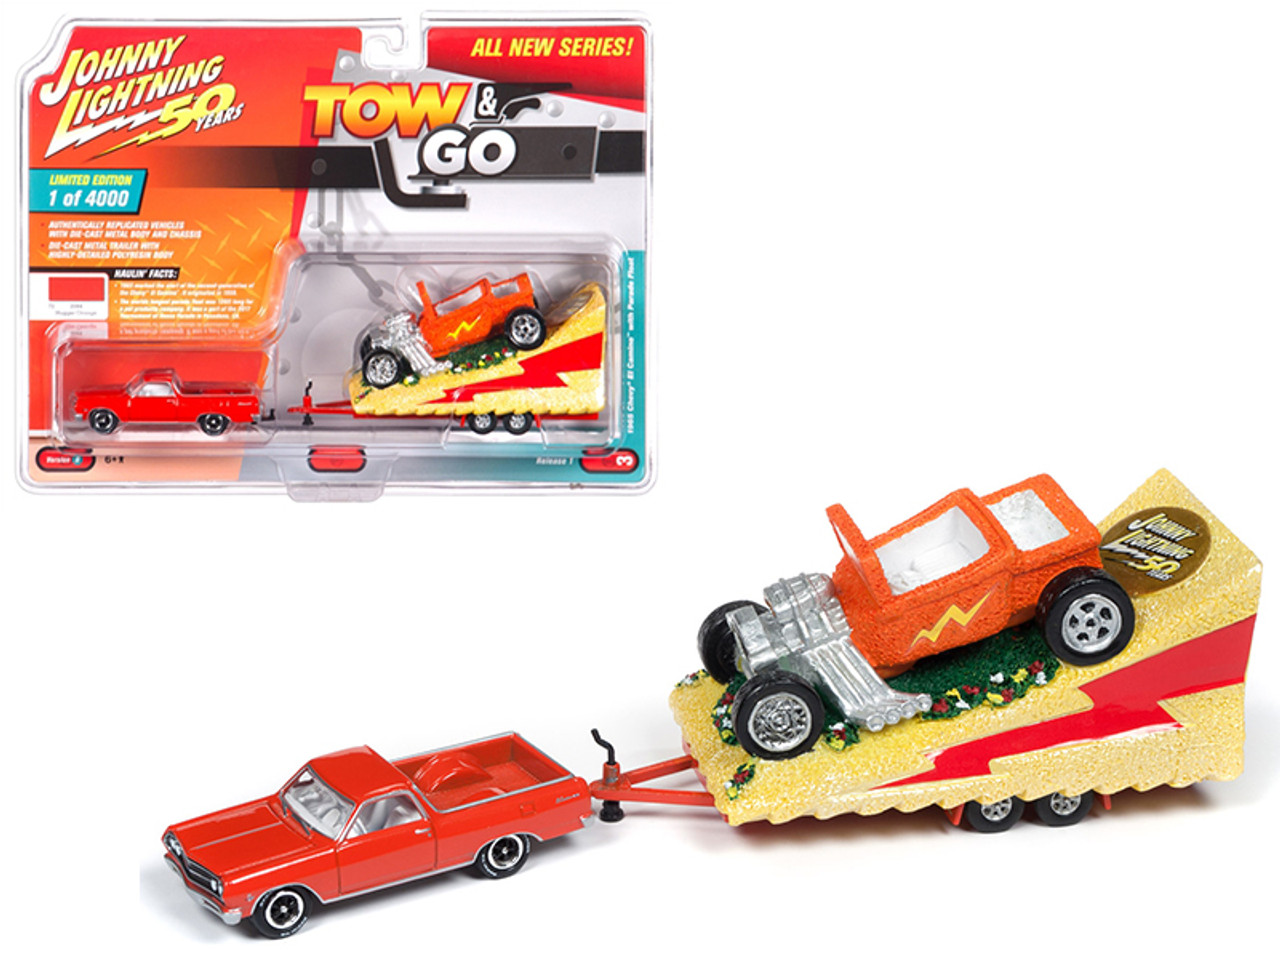 1965 Chevrolet El Camino Hugger Orange with Parade Float Limited Edition to 4,000 pieces Worldwide "Tow & Go" Series 1 1/64 Diecast Model Car by Johnny Lightning